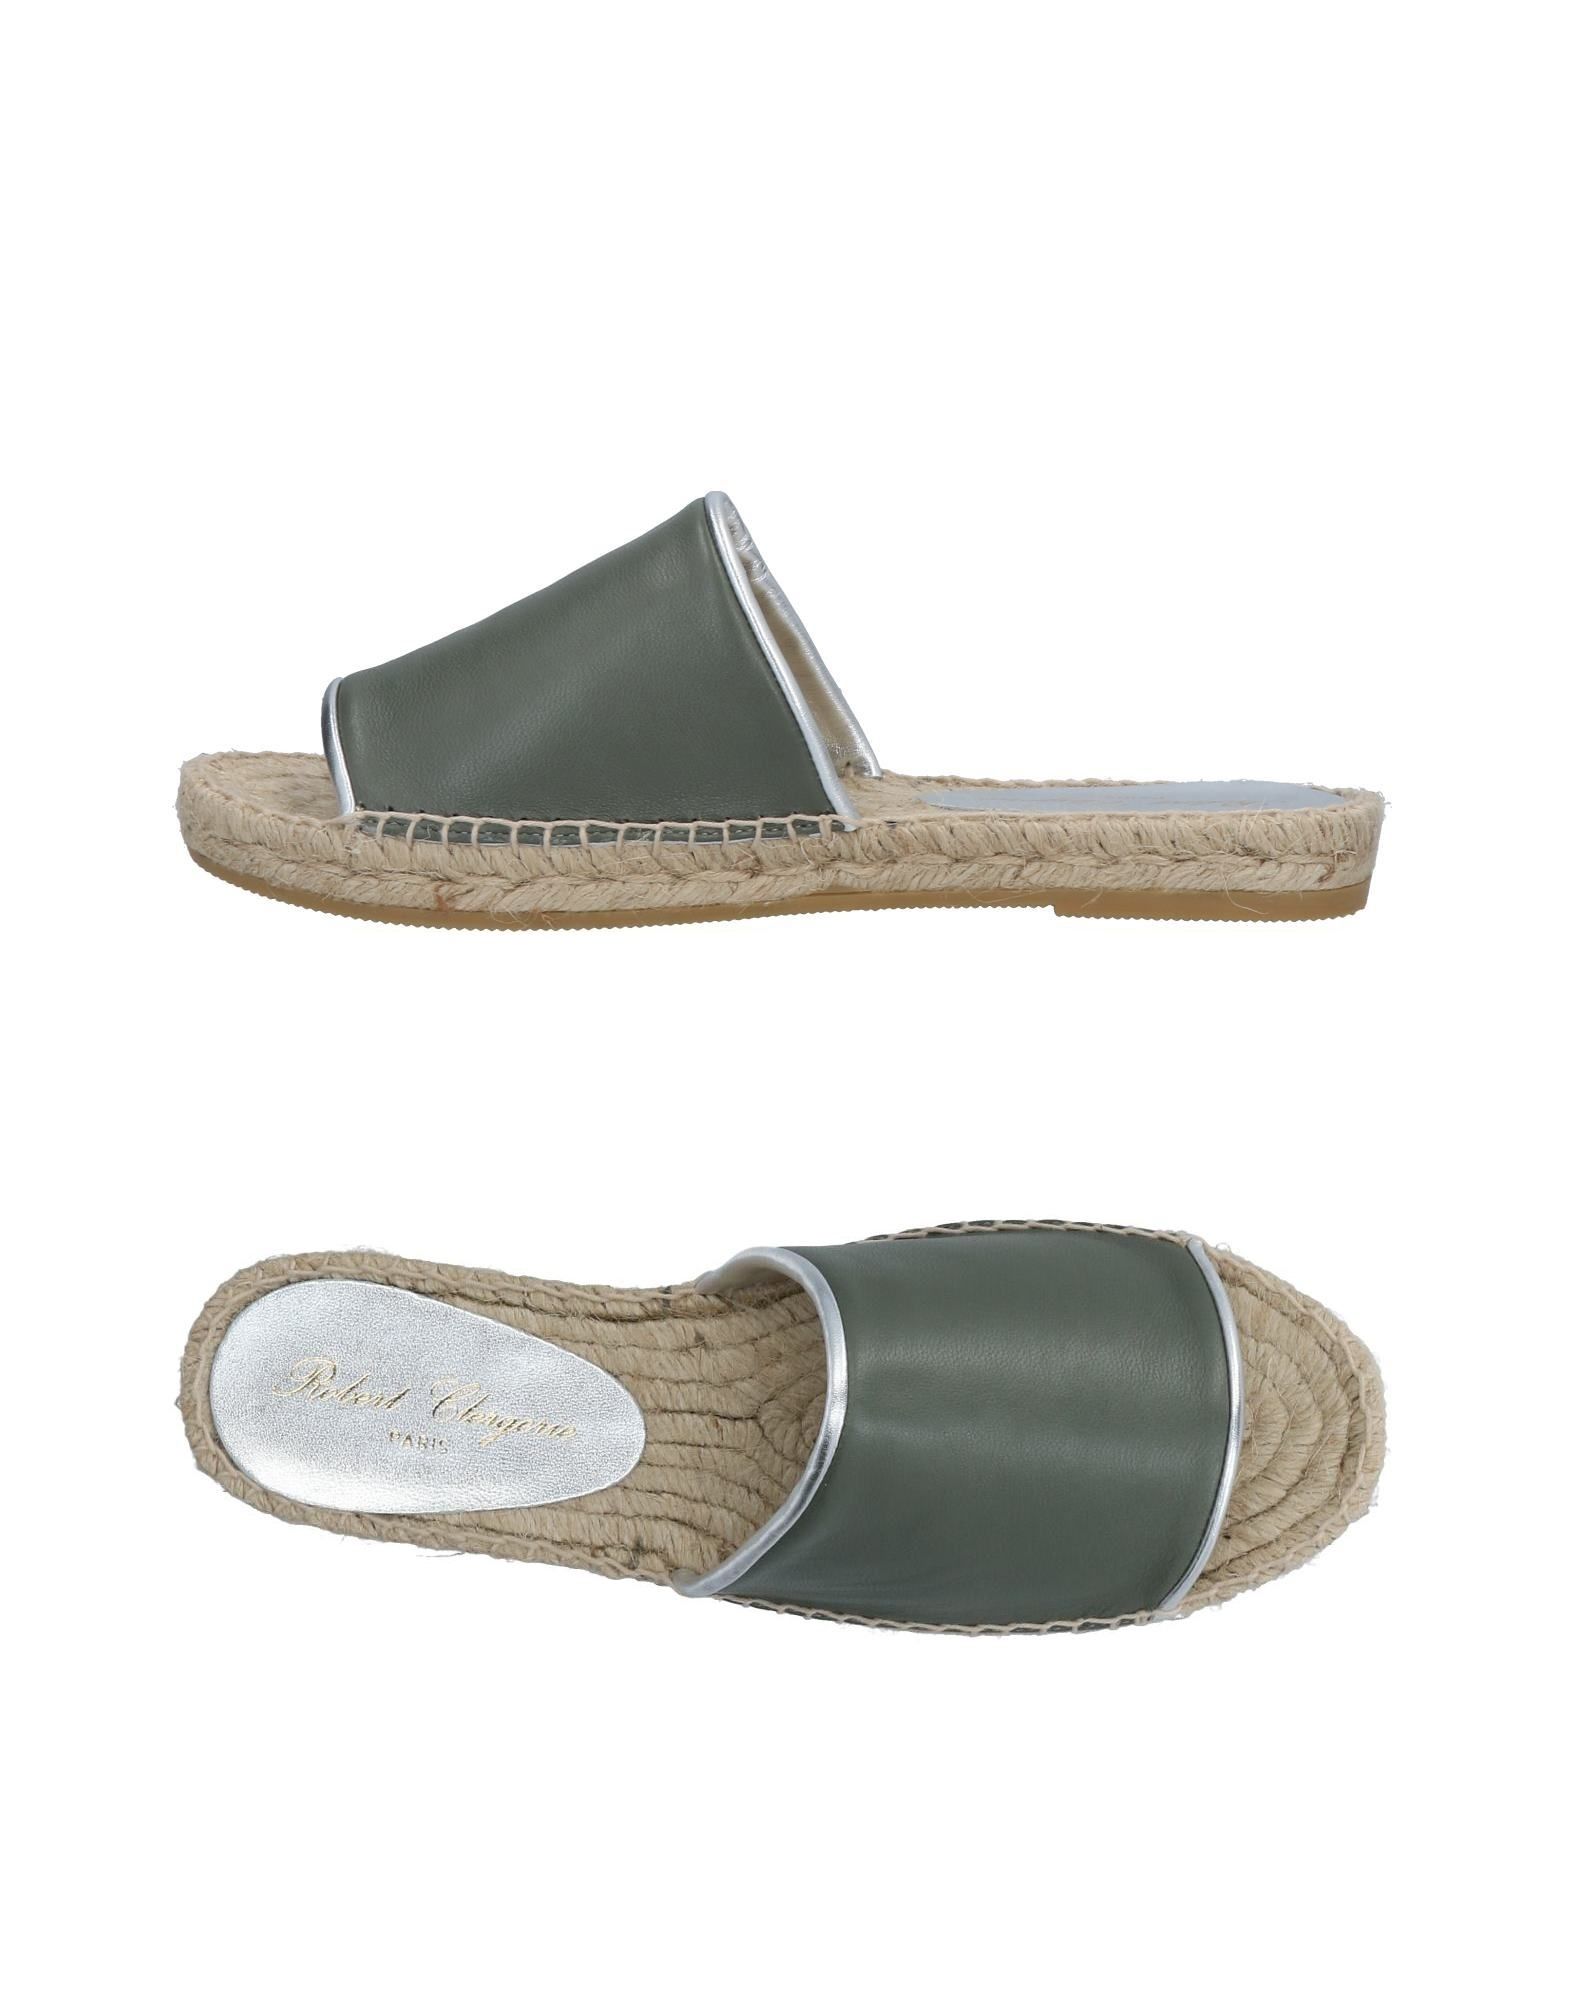 dressing gownRT CLERGERIE ROBERT CLERGERIE WOMAN SANDALS MILITARY GREEN SIZE 8.5 LAMBSKIN,11475476MH 7